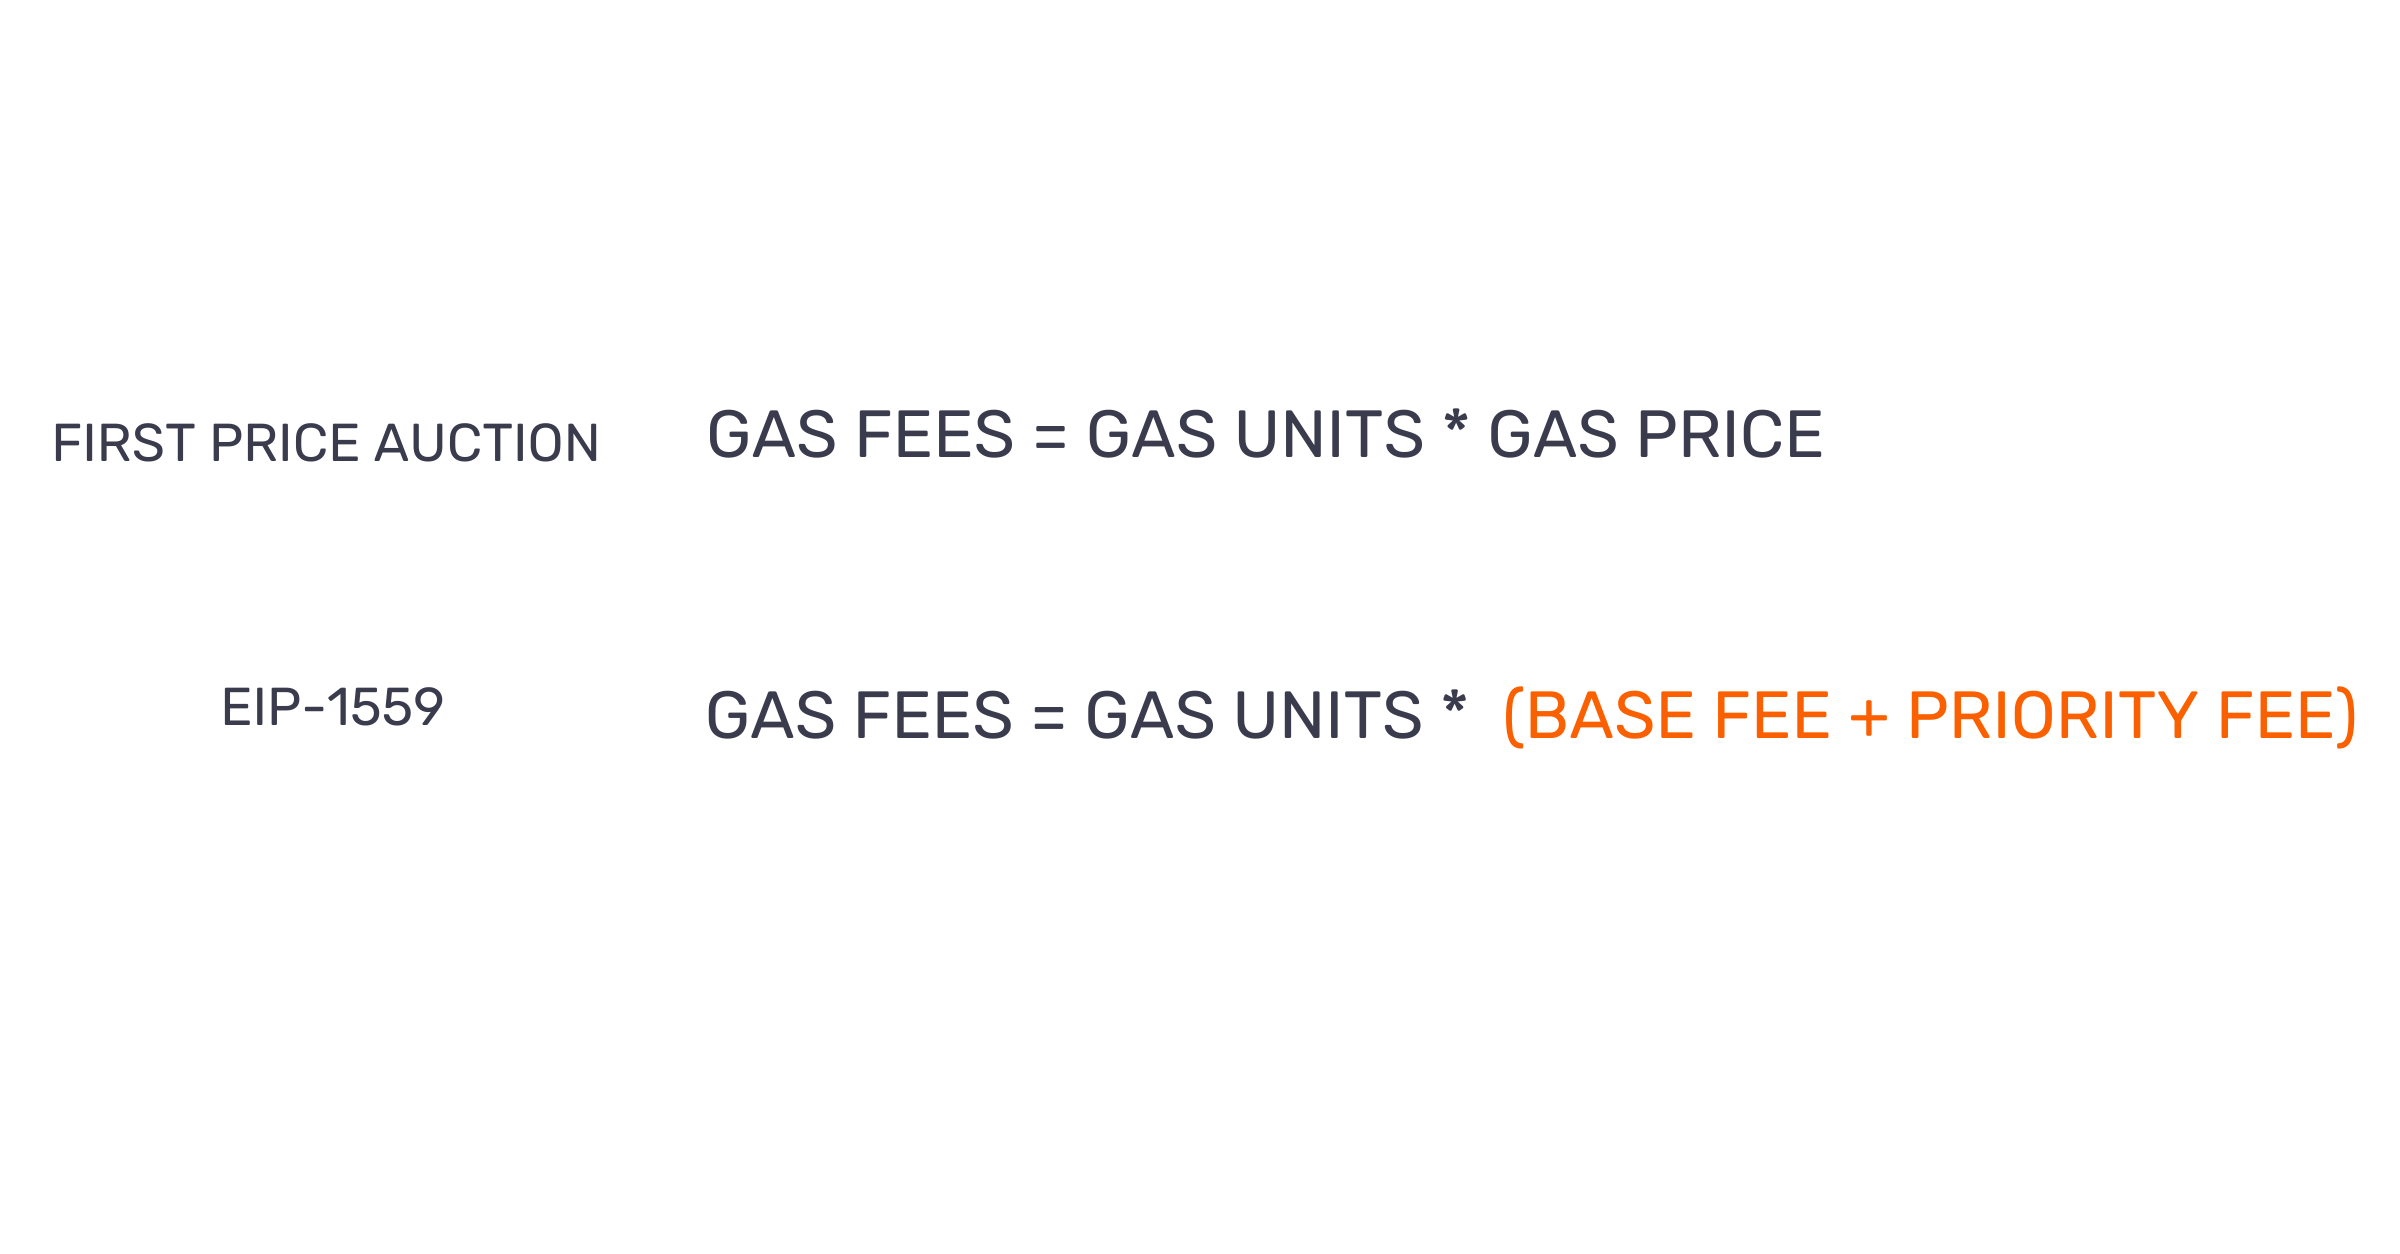 Ethereum Gas Fee Structures